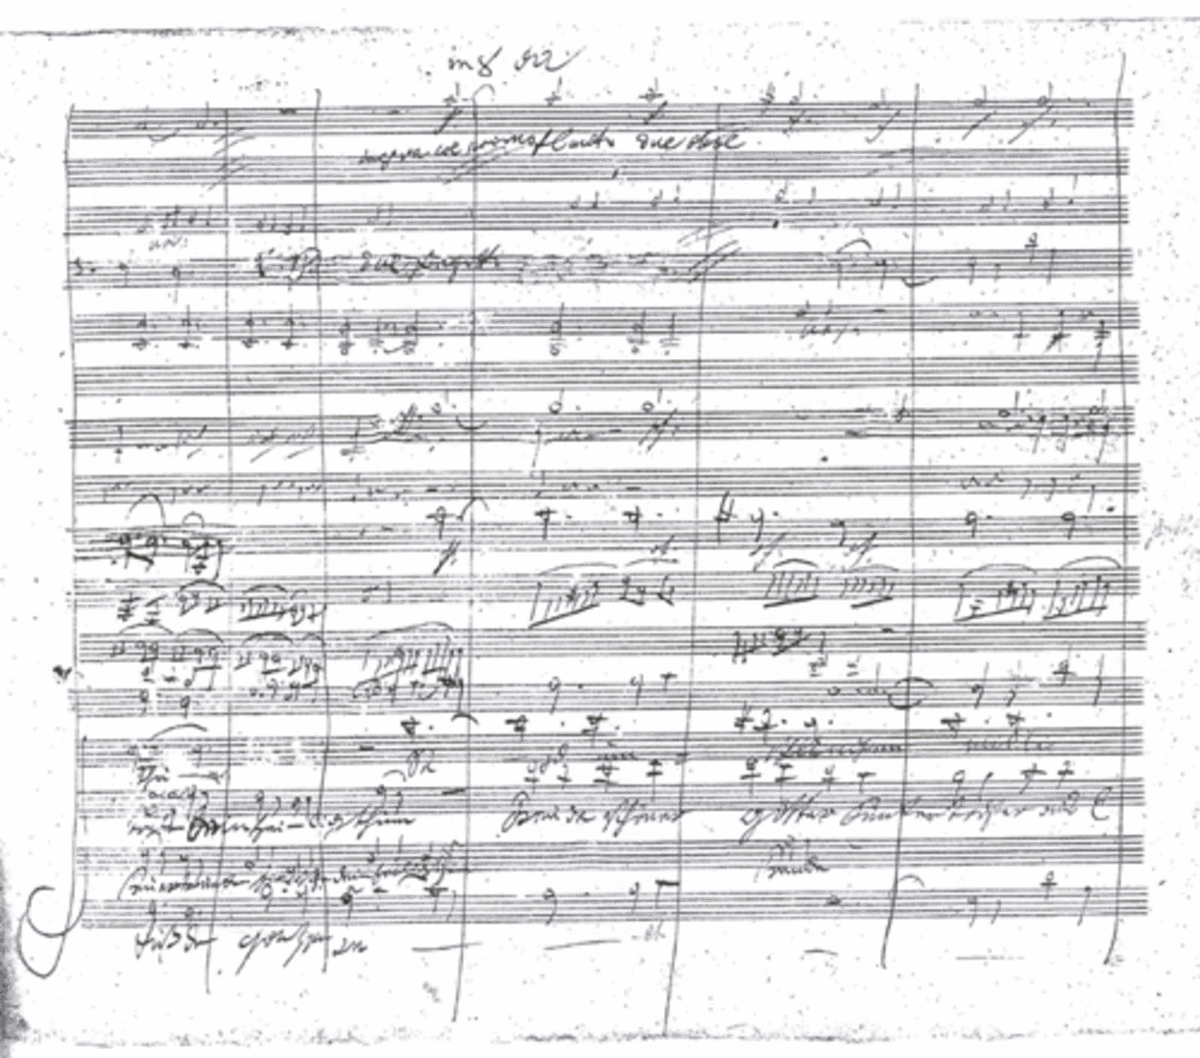 An original handwritten copy from the score of the 9th symphony.